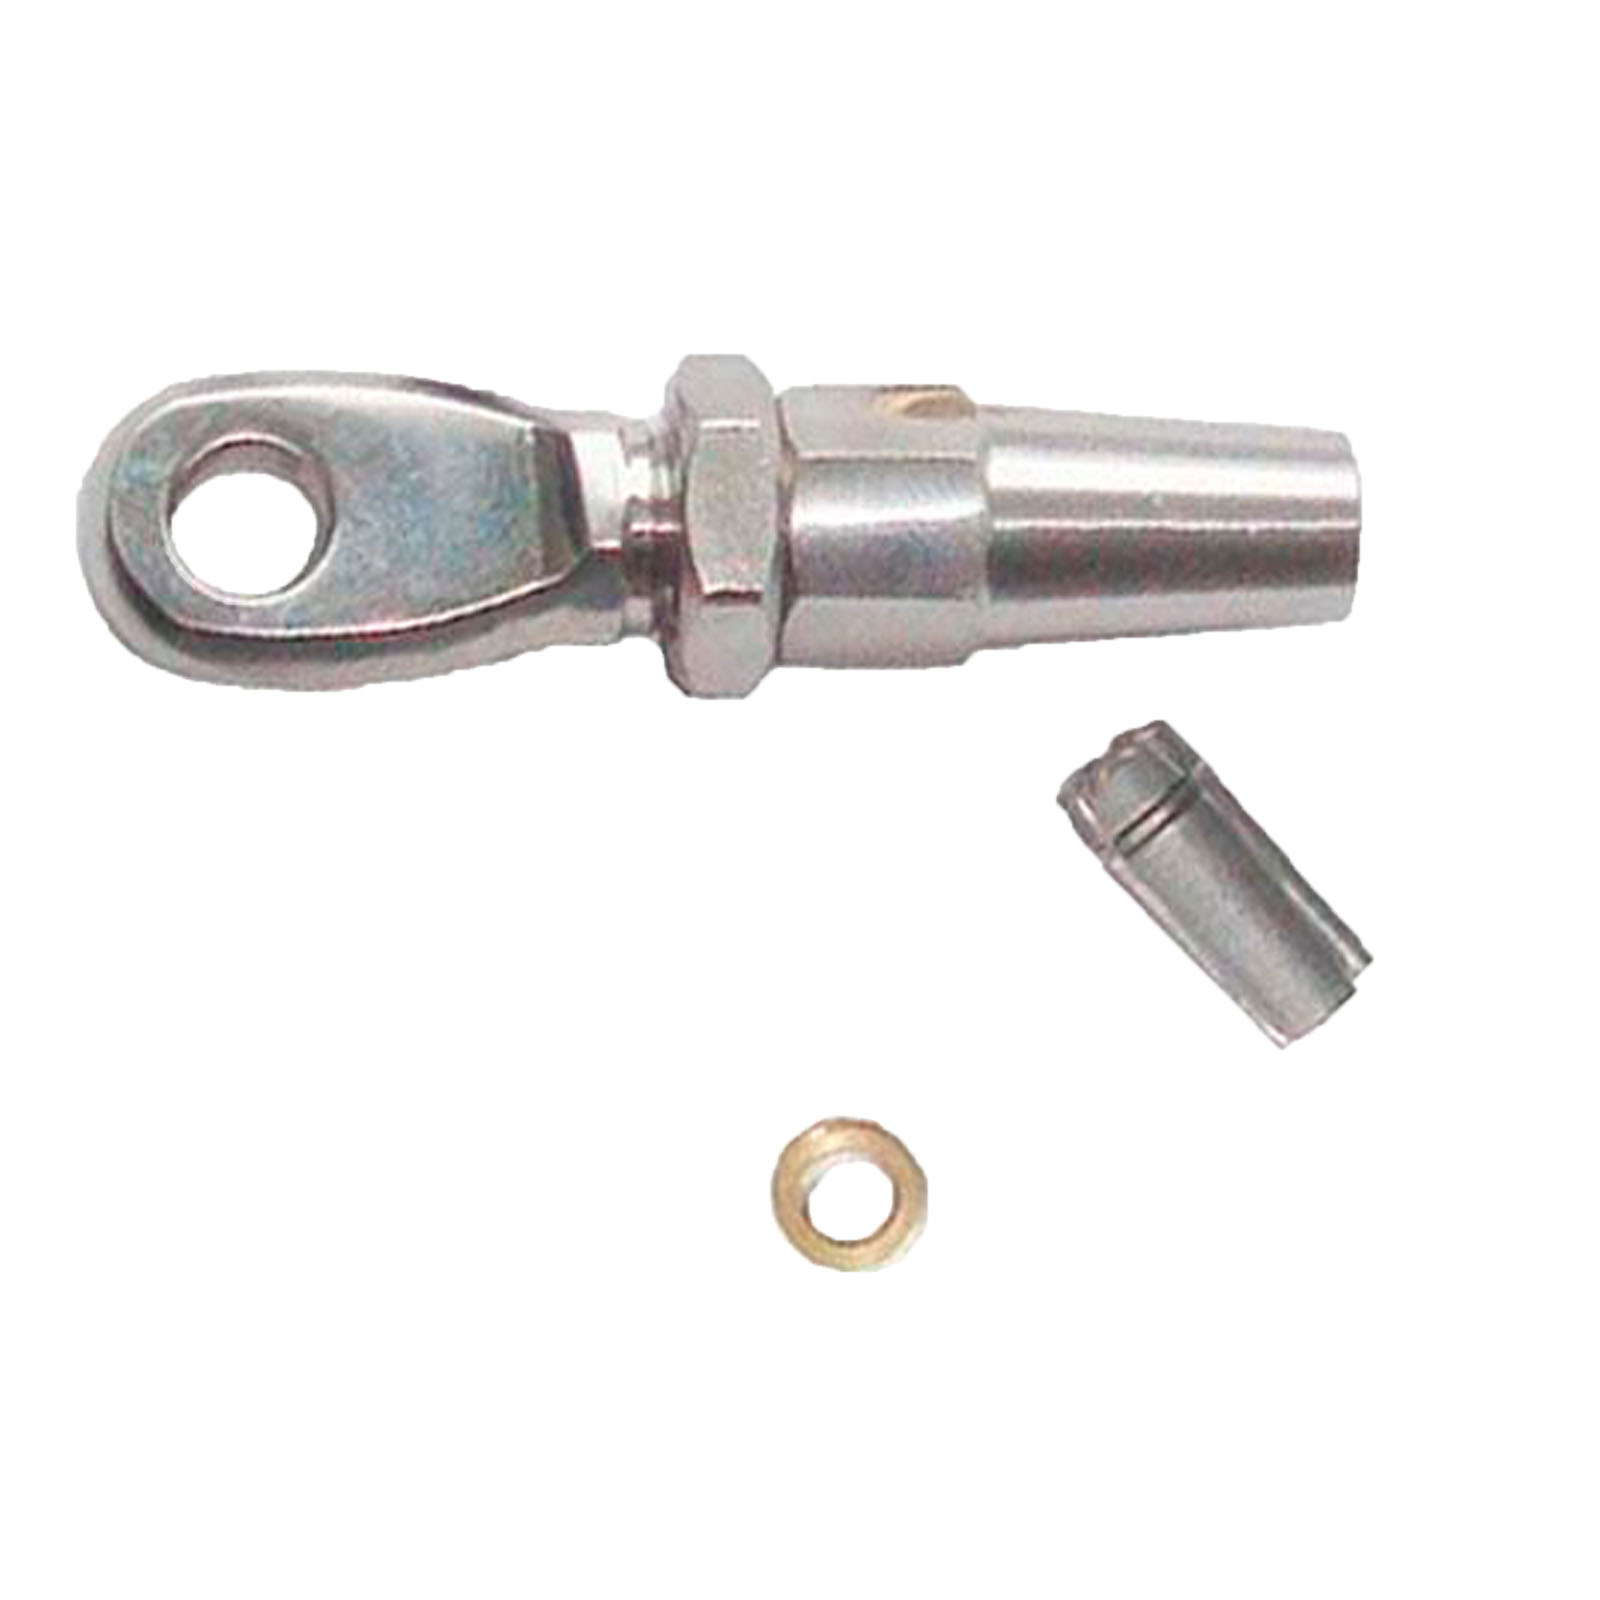 EYE TERMINAL FOR SWAGING Stainless Steel